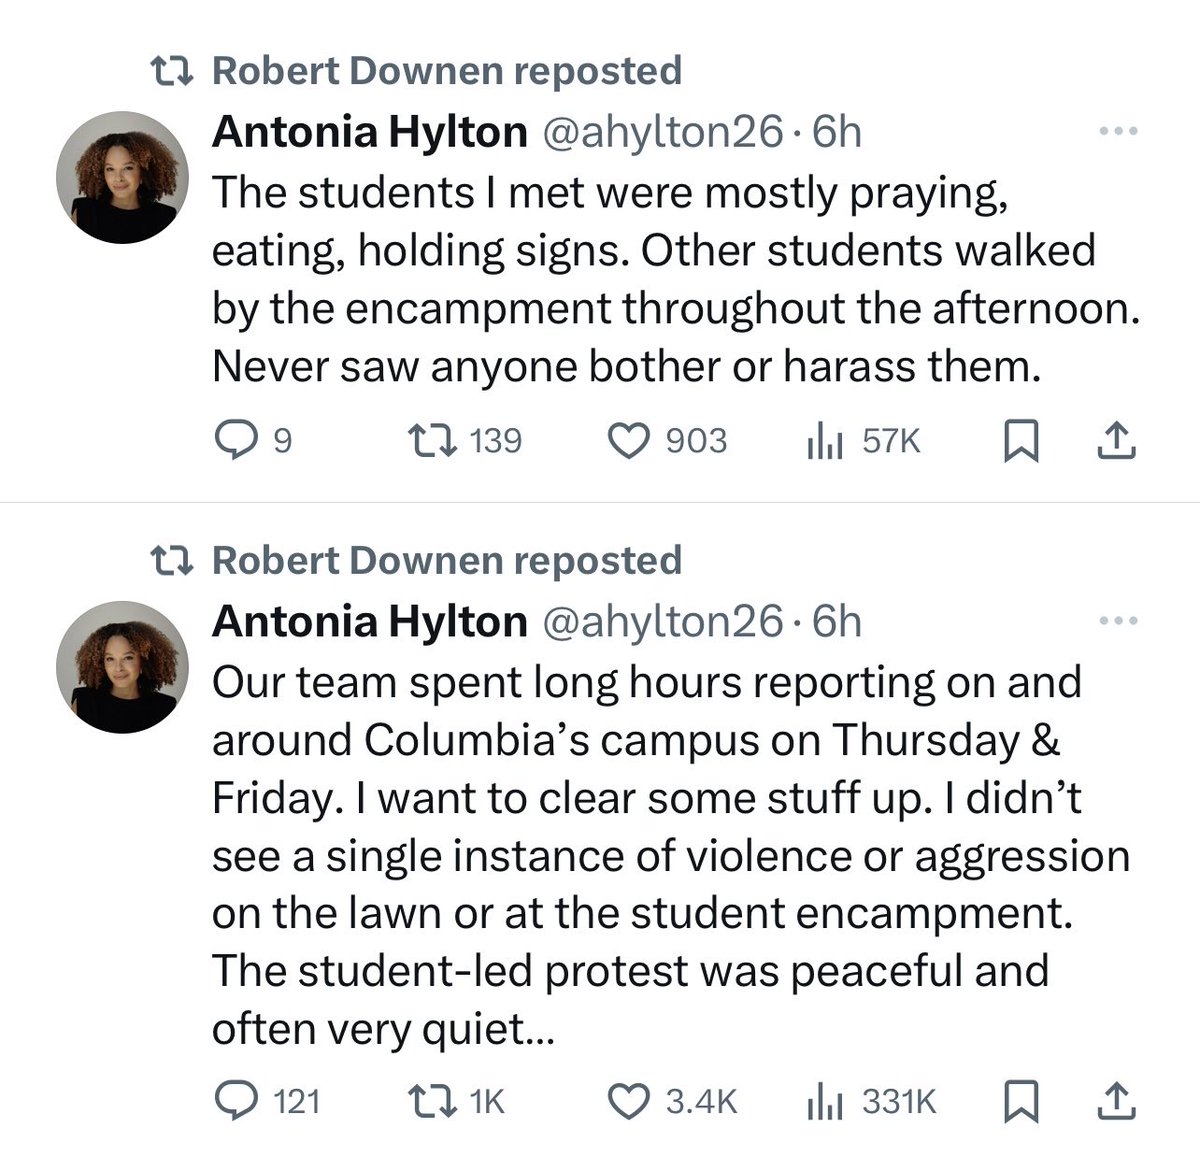 The ⁦@TexasTribune⁩ “extremism” reporter - who writes only on right wing extremism - RTs posts which downplay the Columbia situation. There is video evidence of terrorist threats and calls for violence against Jews at Columbia It’s so bad the White House condemned it.